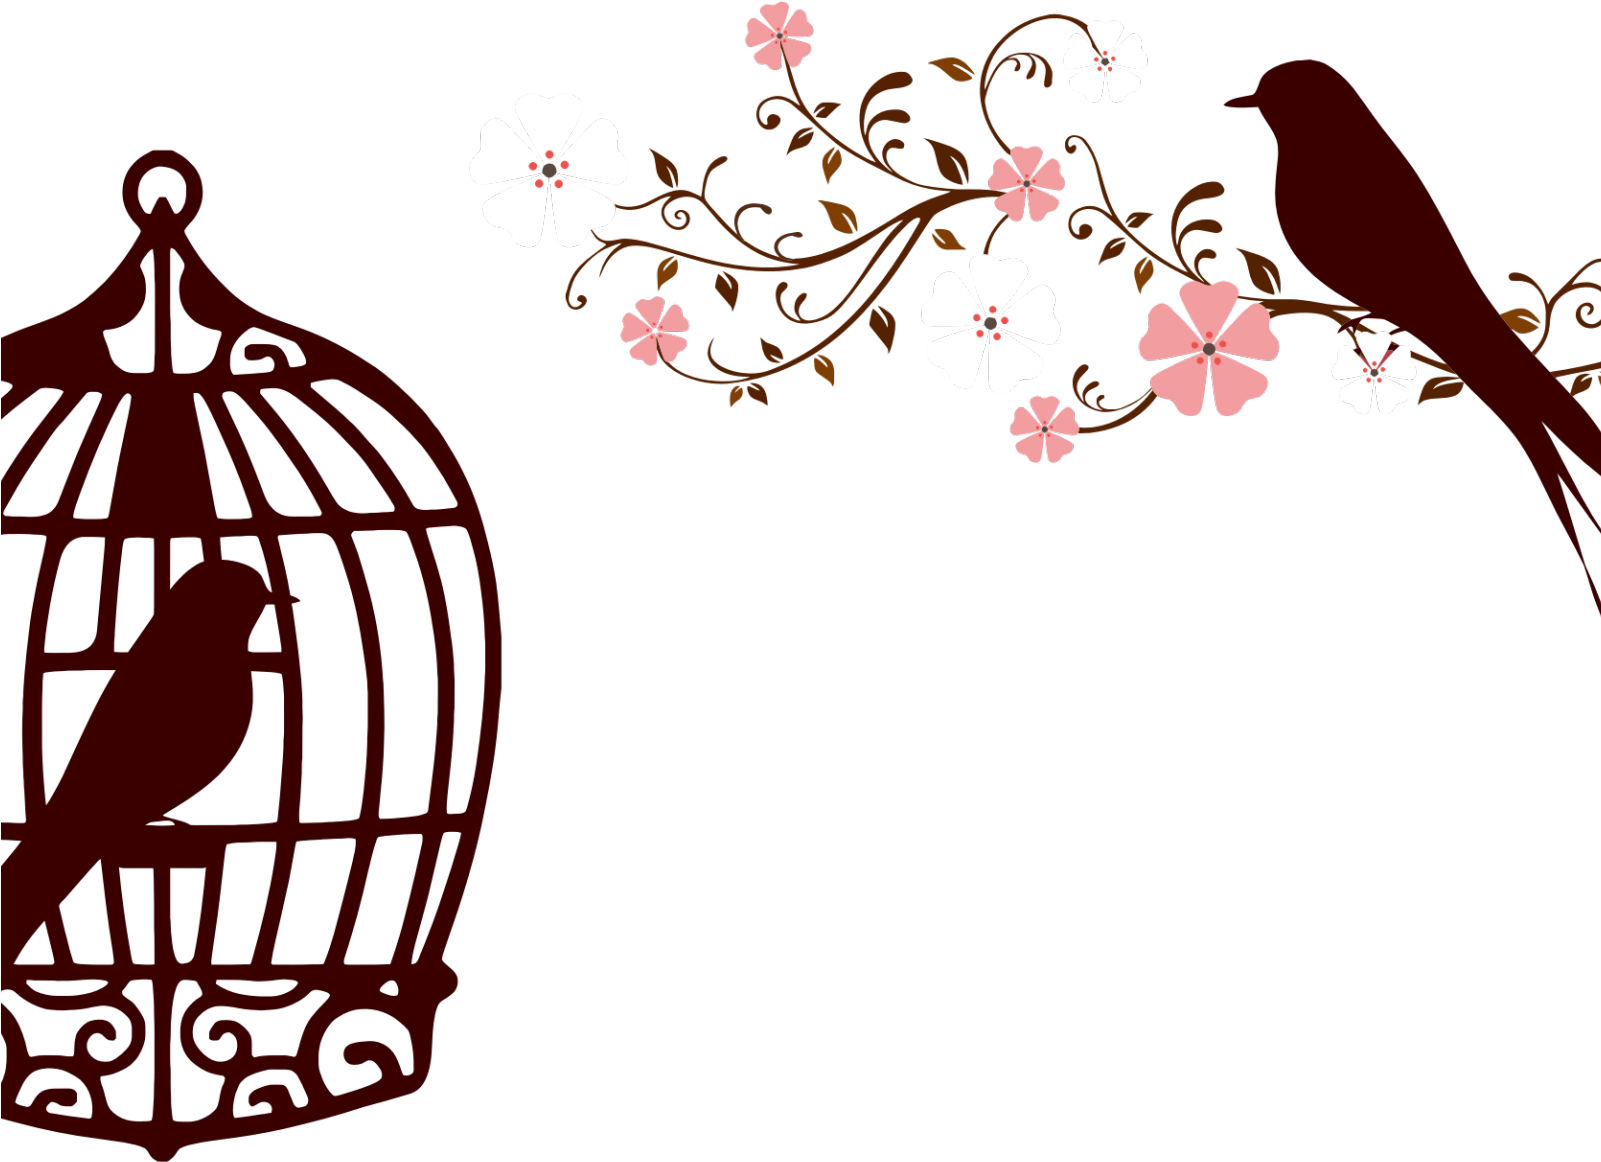 A Bird In A Cage With Flowers